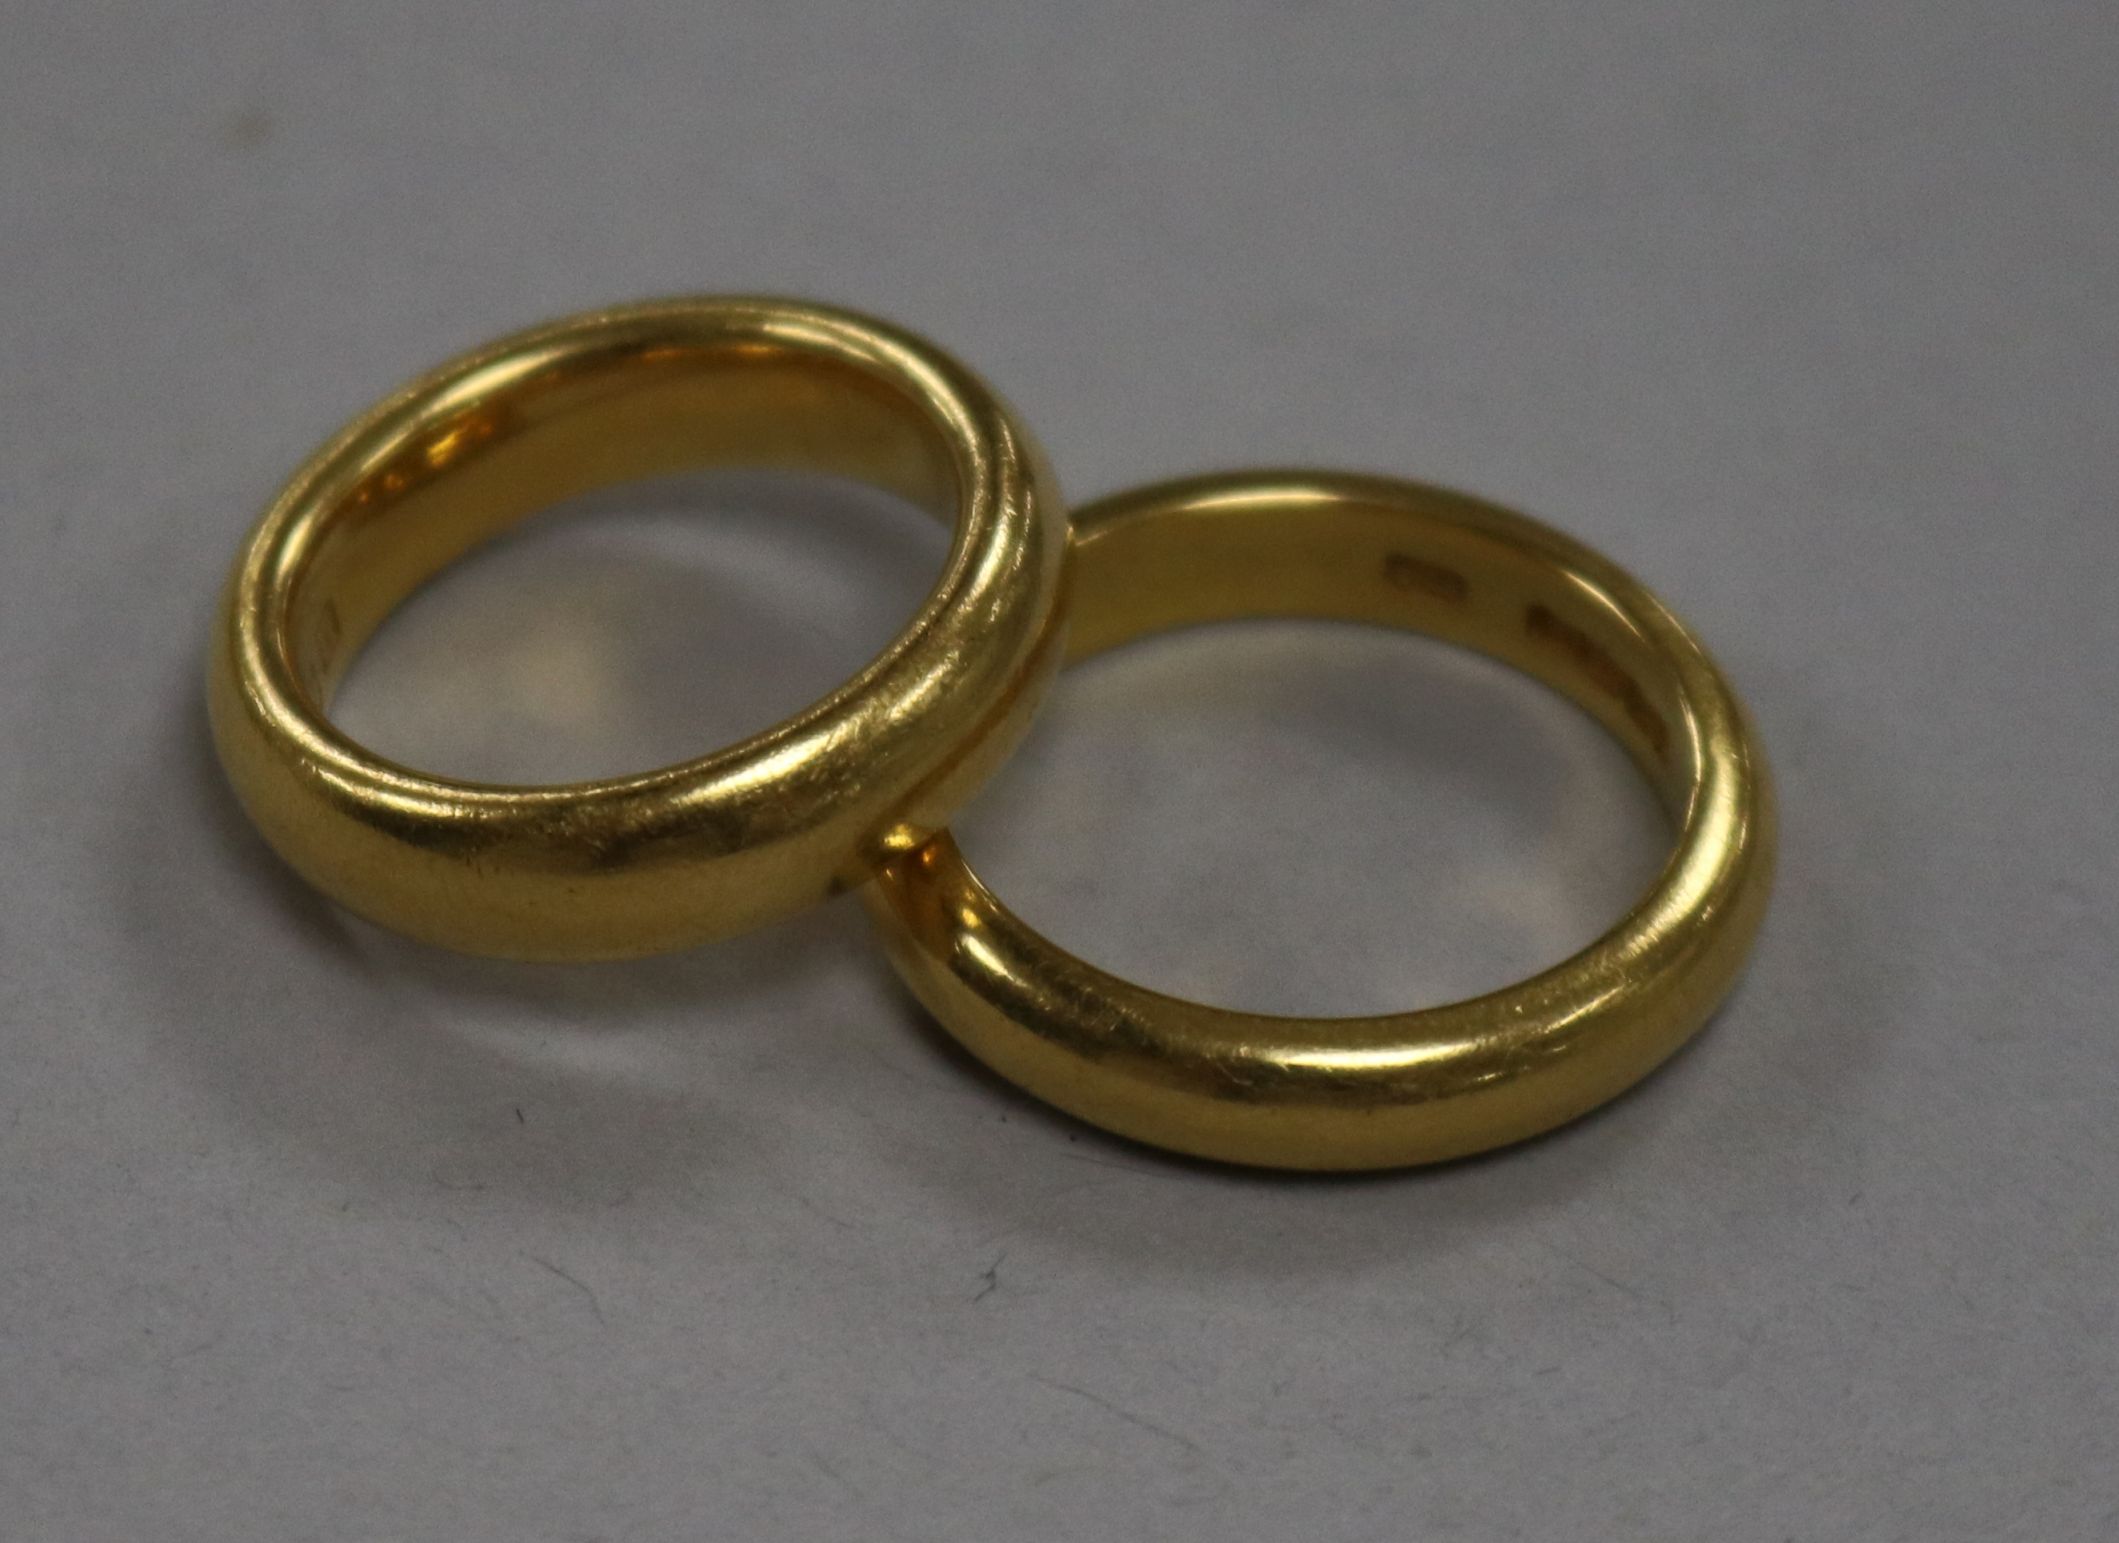 Two 22ct gold wedding rings, 19.5g gross